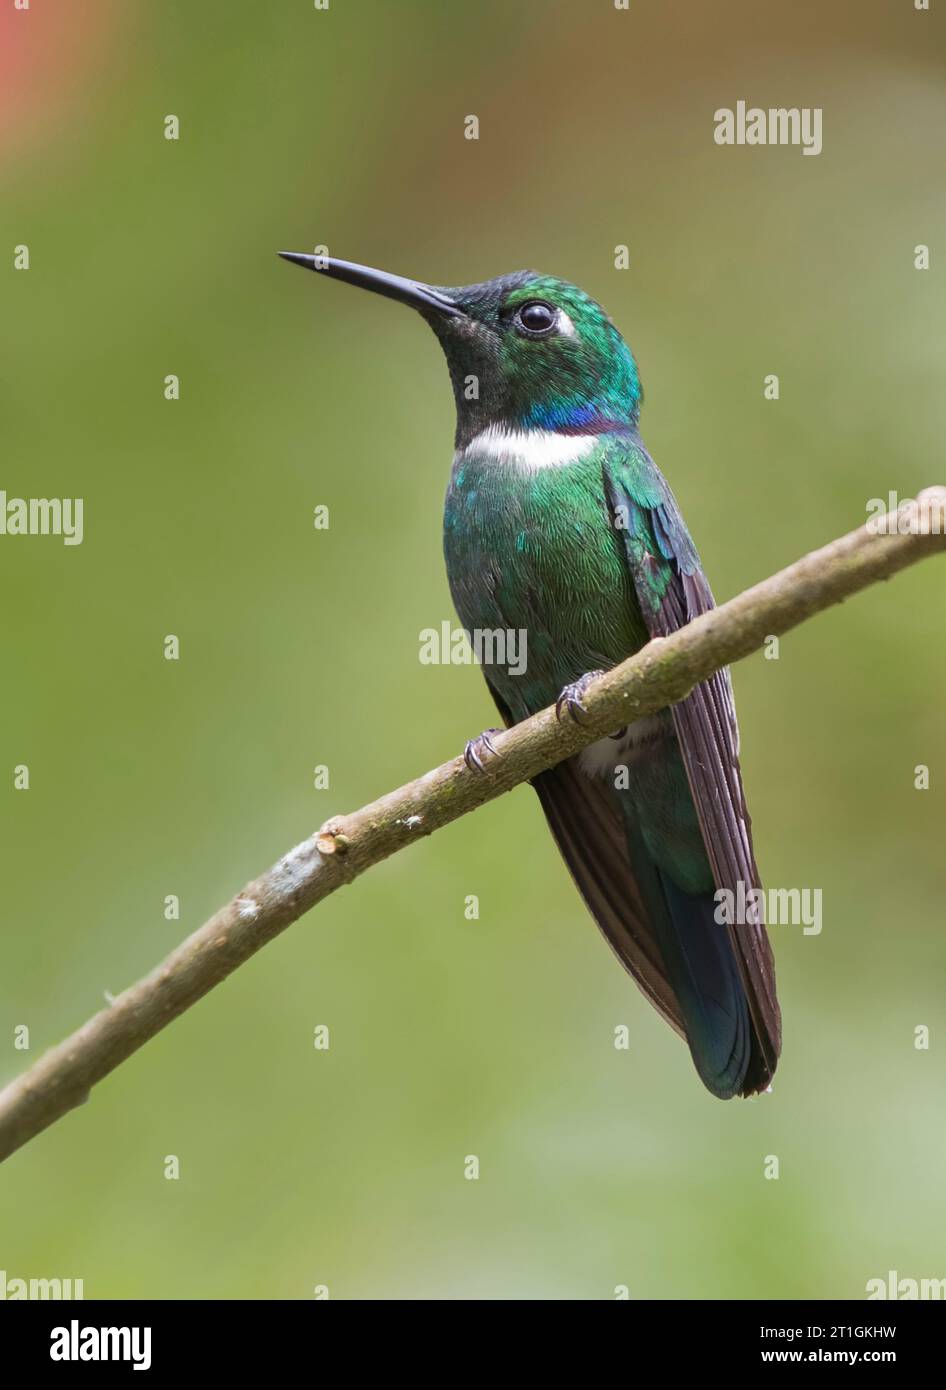 white-throated daggerbill, white-throated wedgebill, western wedge-billed hummingbird (Schistes albogularis), male perched on a branch, Colombia Stock Photo